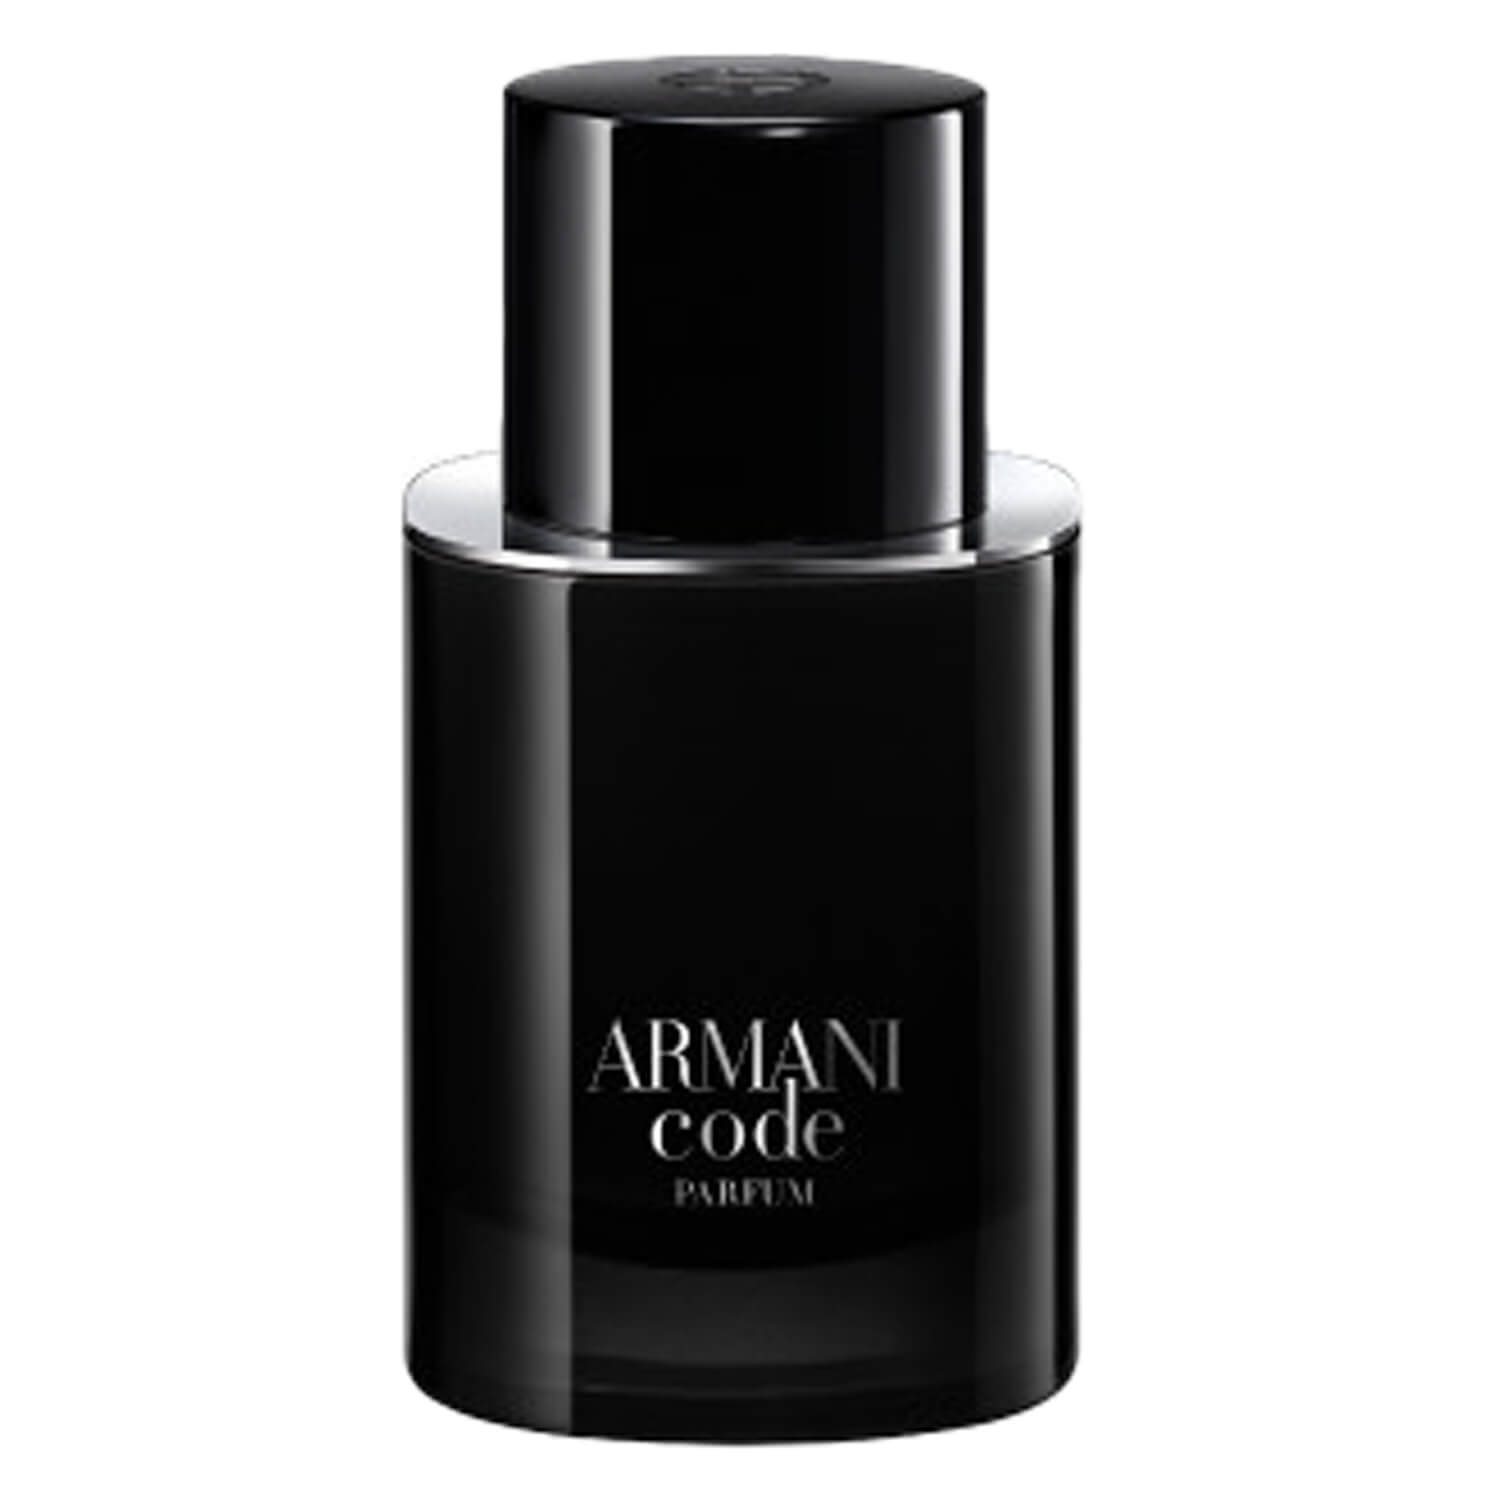 Product image from Armani Code - Le Parfum